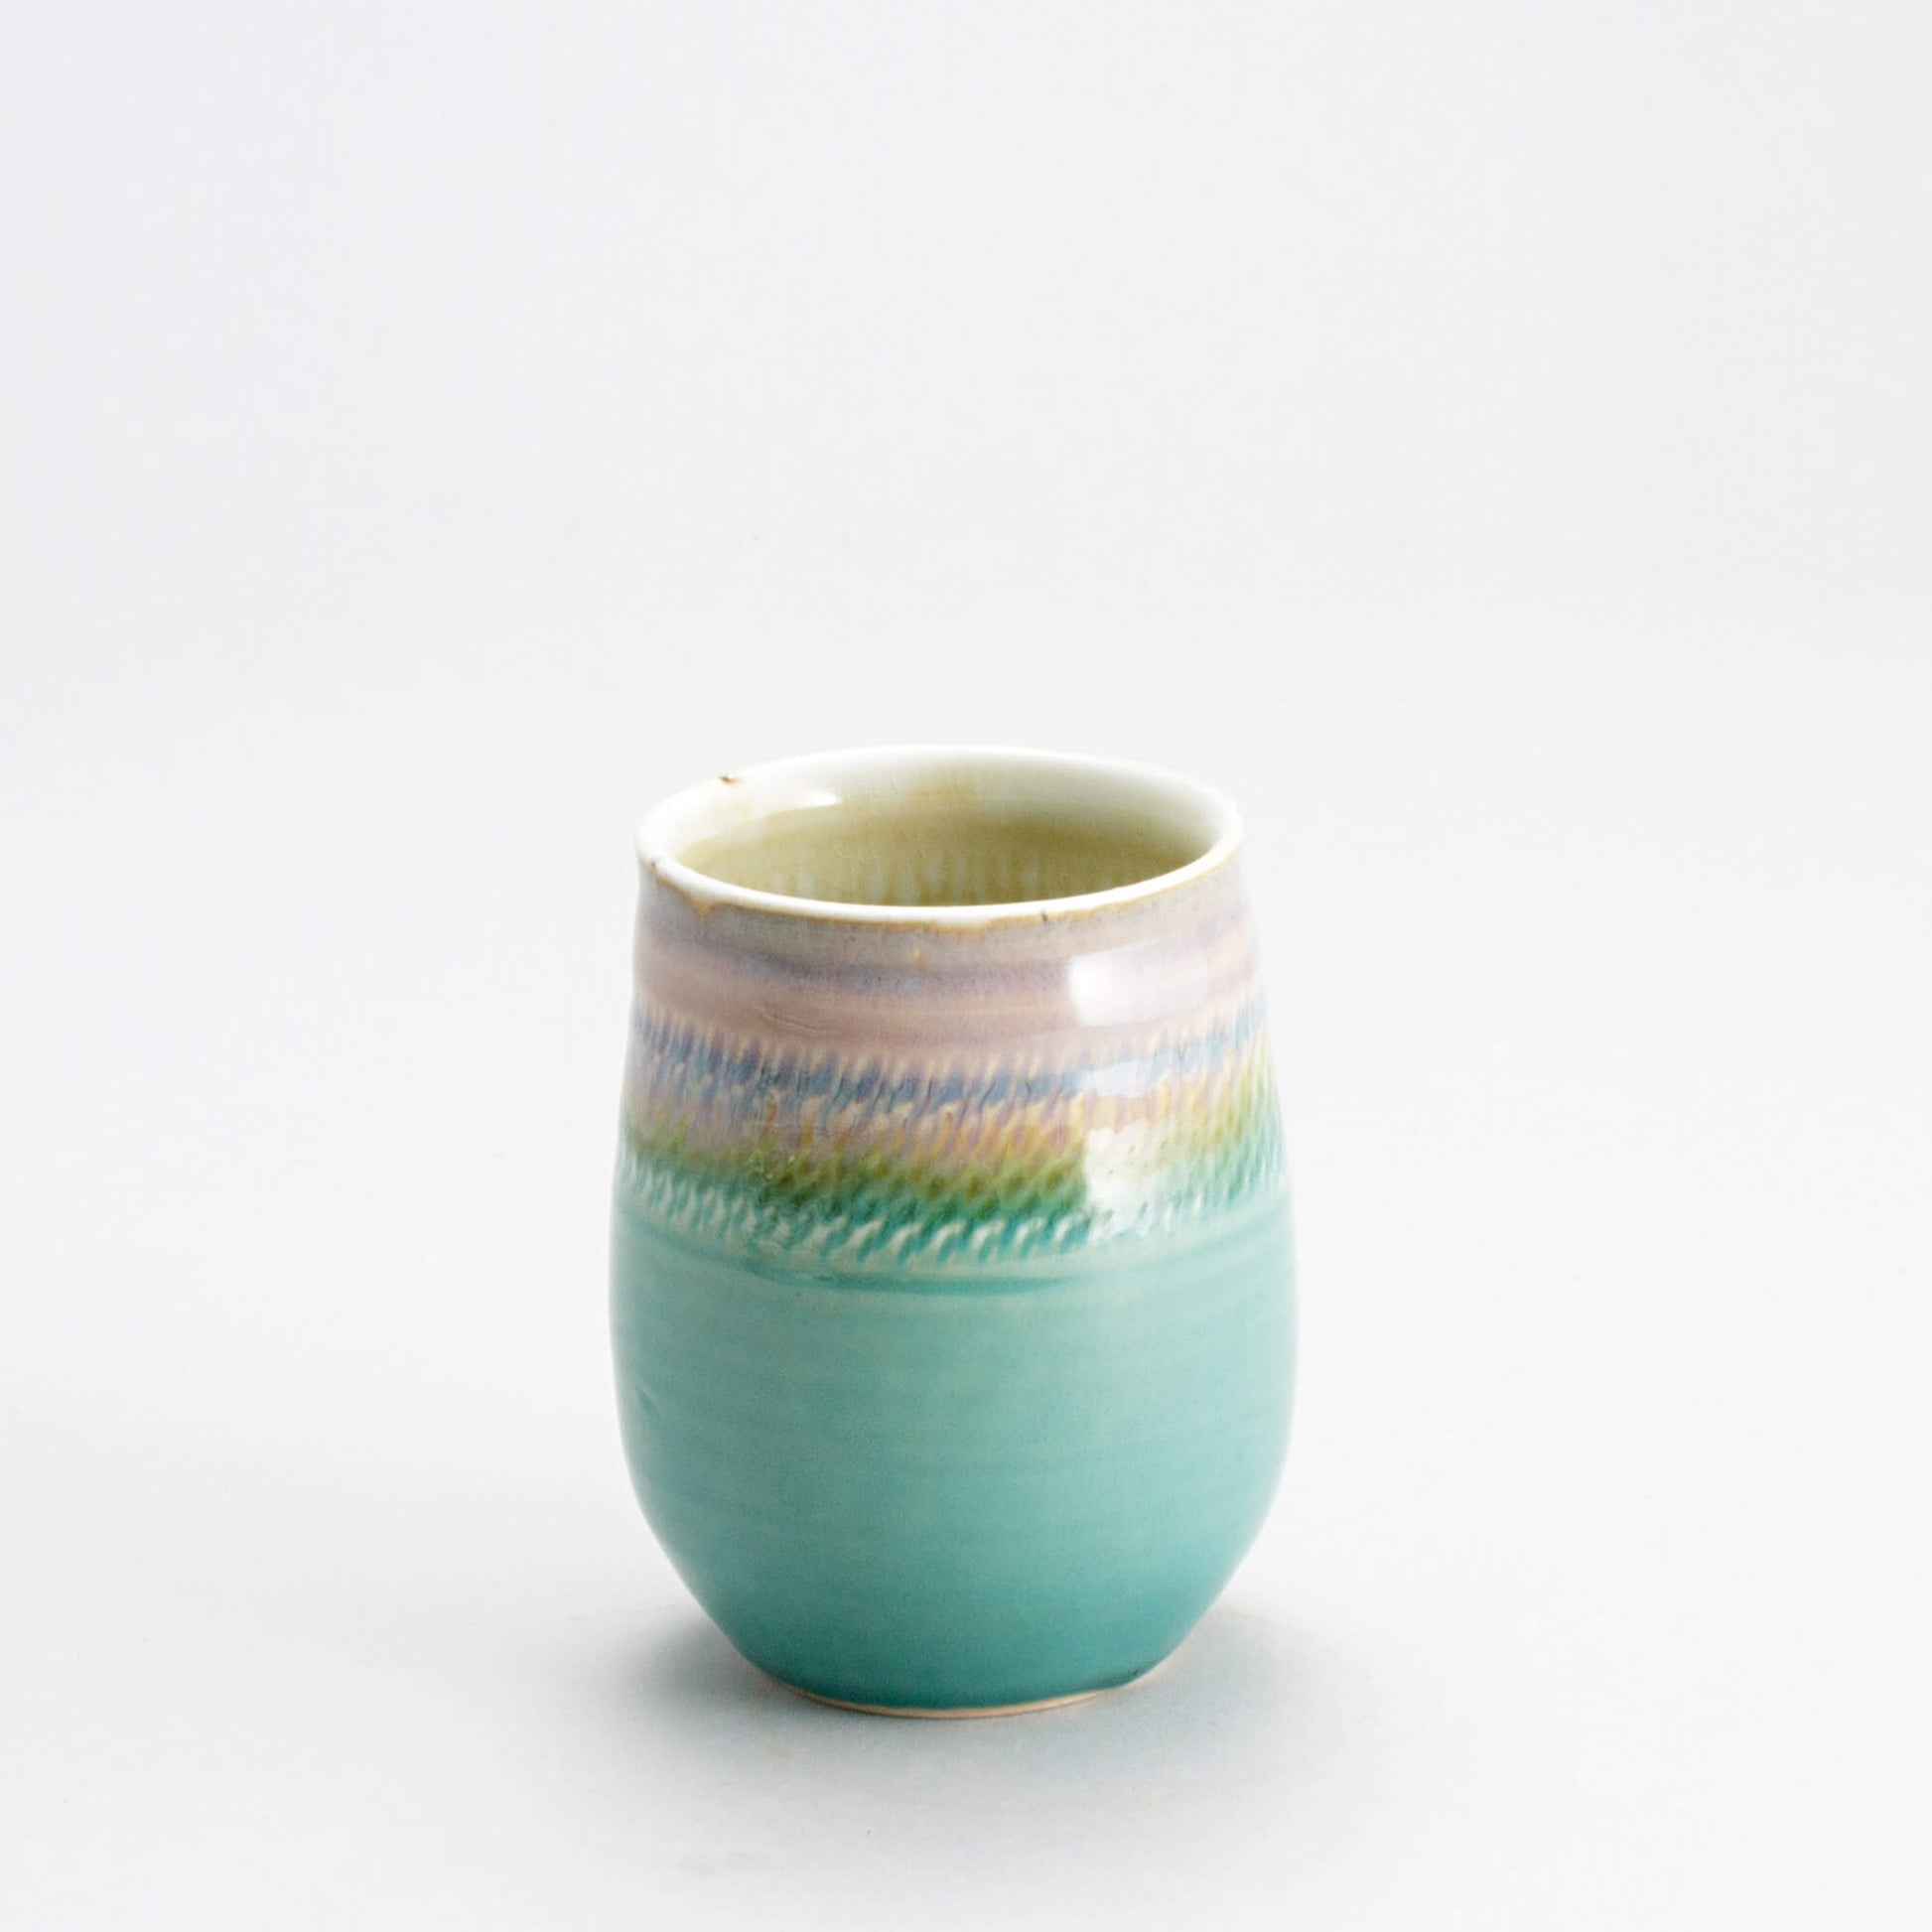 Handmade Pottery Stemless Wine Tumbler made by Georgetown Pottery in Maine Green Oribe